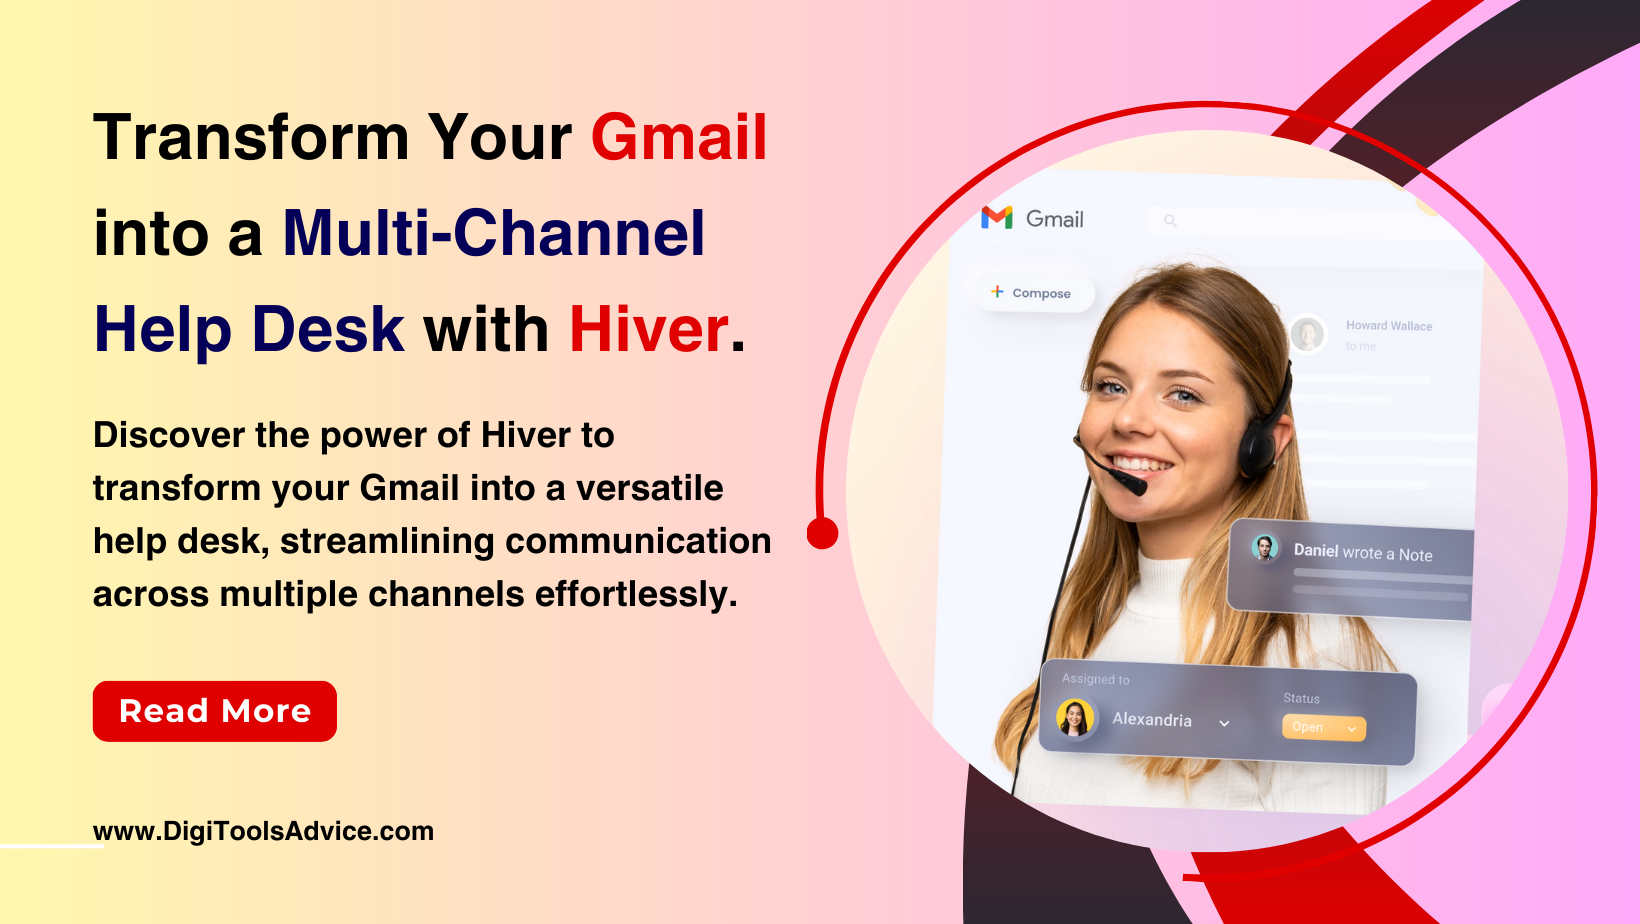 Transform Your Gmail into a Multi-Channel Help Desk with Hiver.